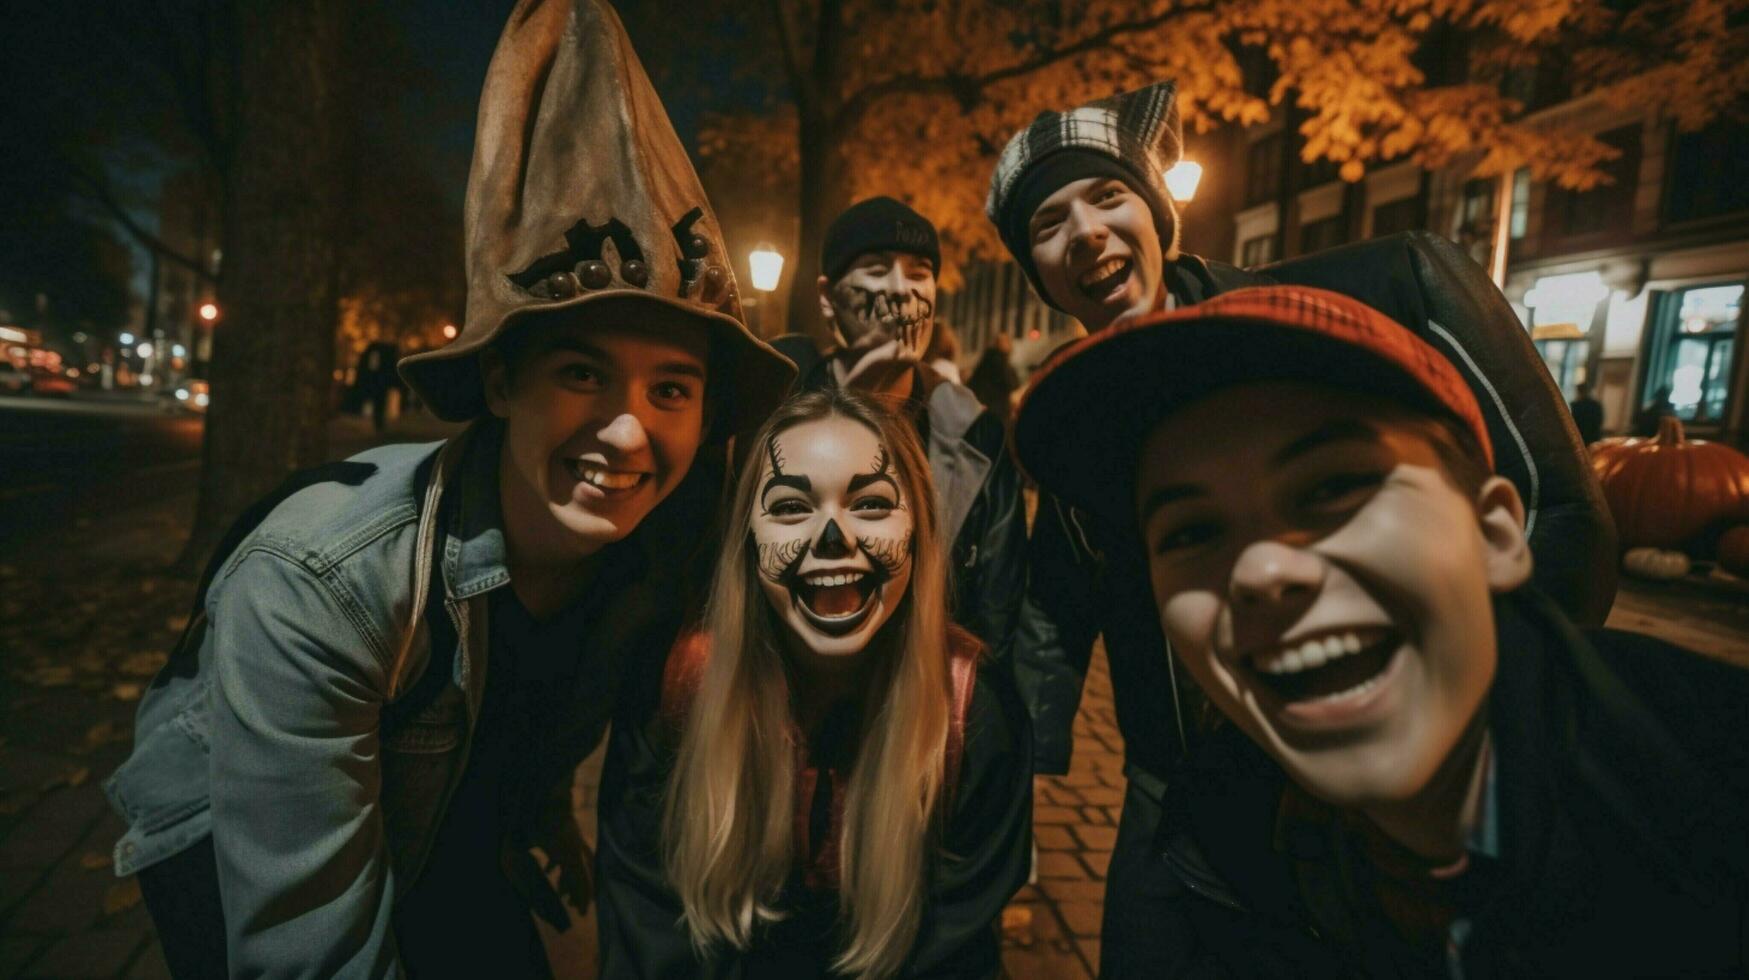 young adults smiling looking at camera outdoors in spooky photo